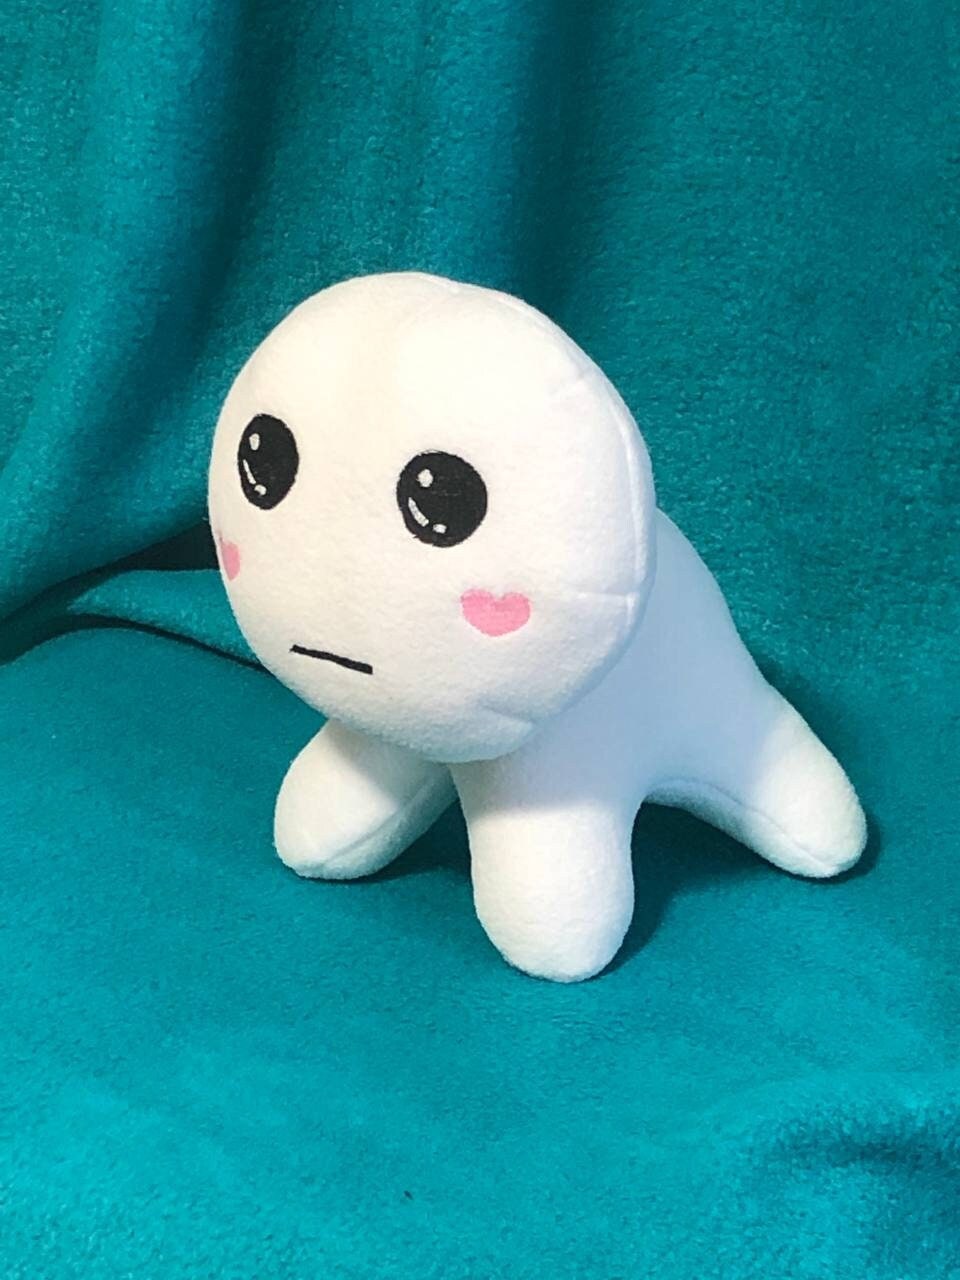 Yippee meme, TBH plush, Autism Creature handmade plushie, 7.8 in, made to  order